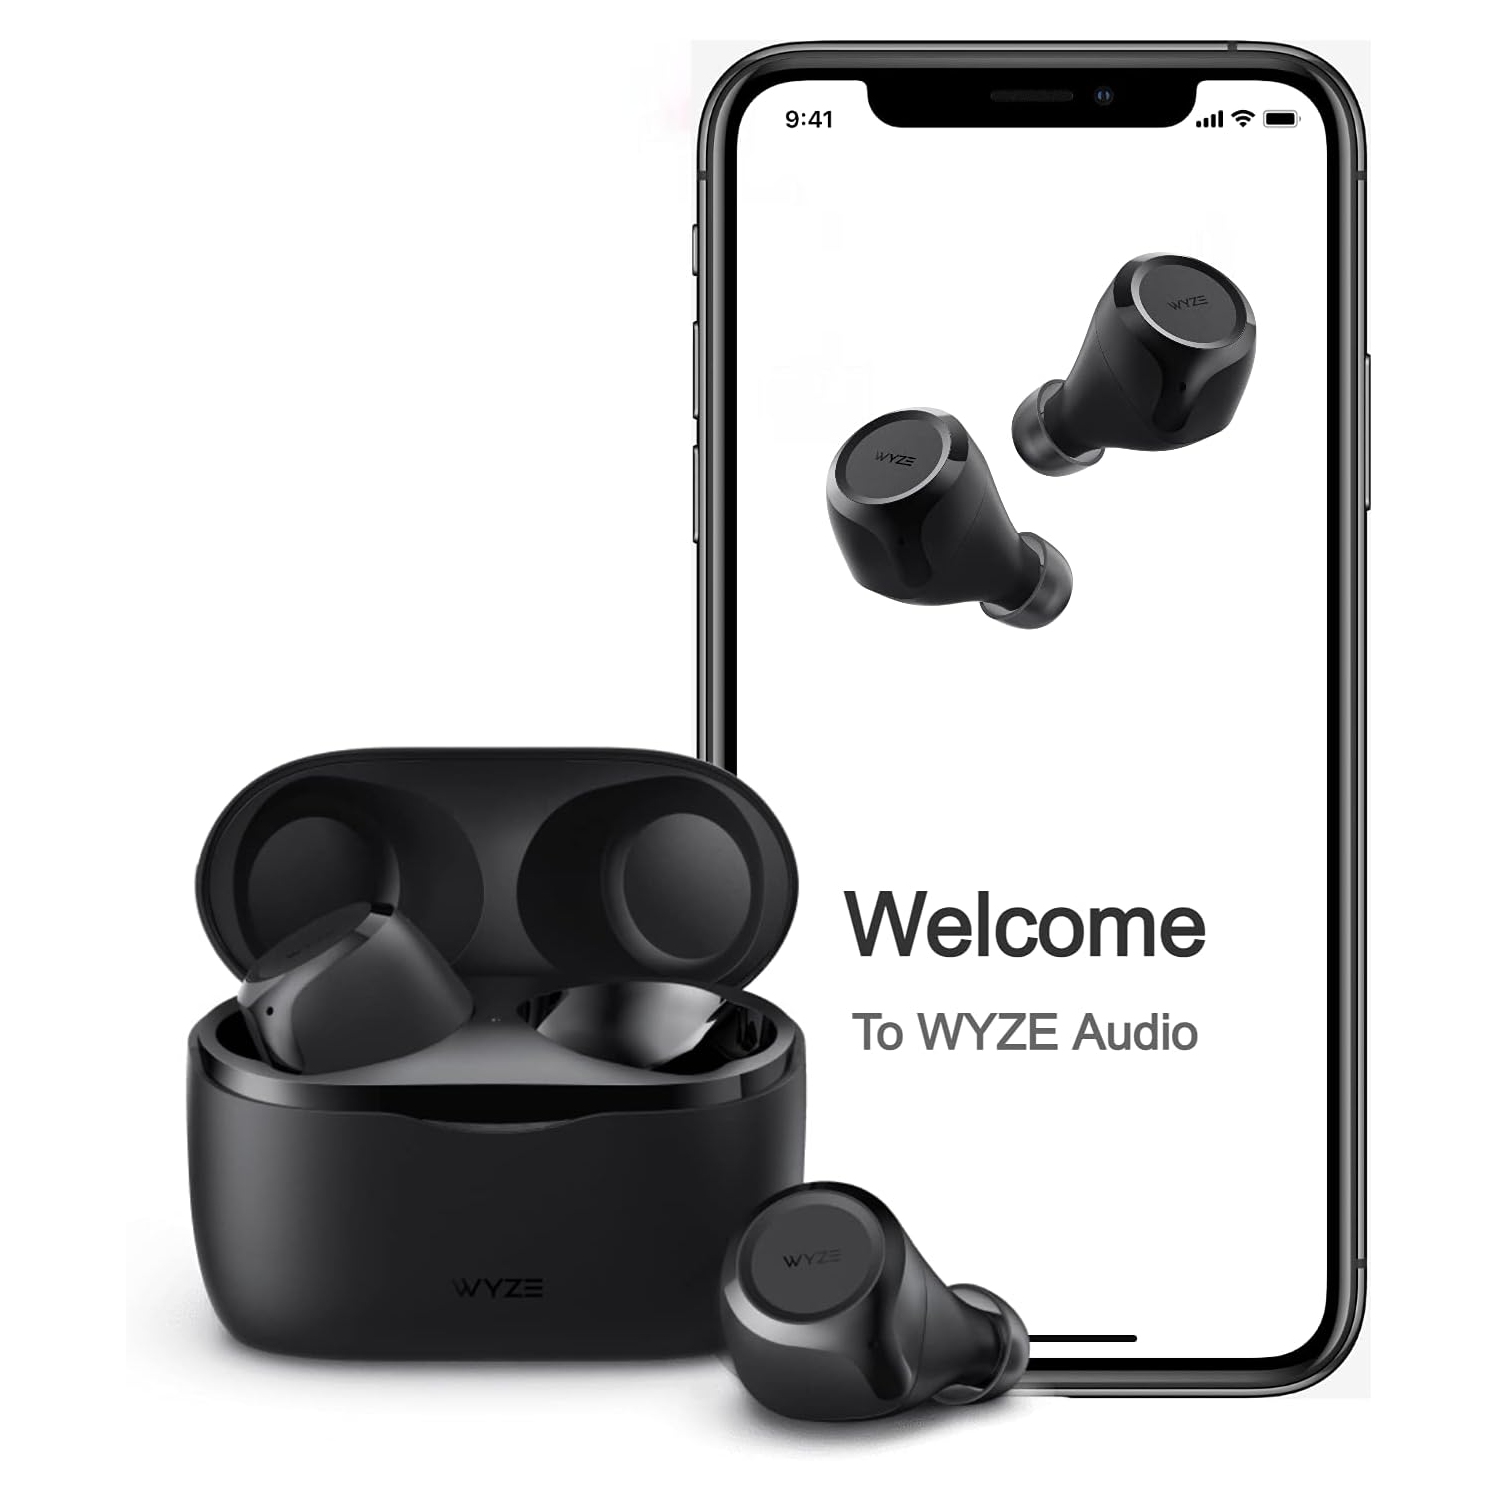 WYZE Wireless Earbuds 5.0 Bluetooth Headphones with IPX5 Sweat Resistance, 30 dB Noise Reduction,4 Voice-Isolating Mics, Alexa Built-in True Wireless Earbuds,Charging Case, Workout